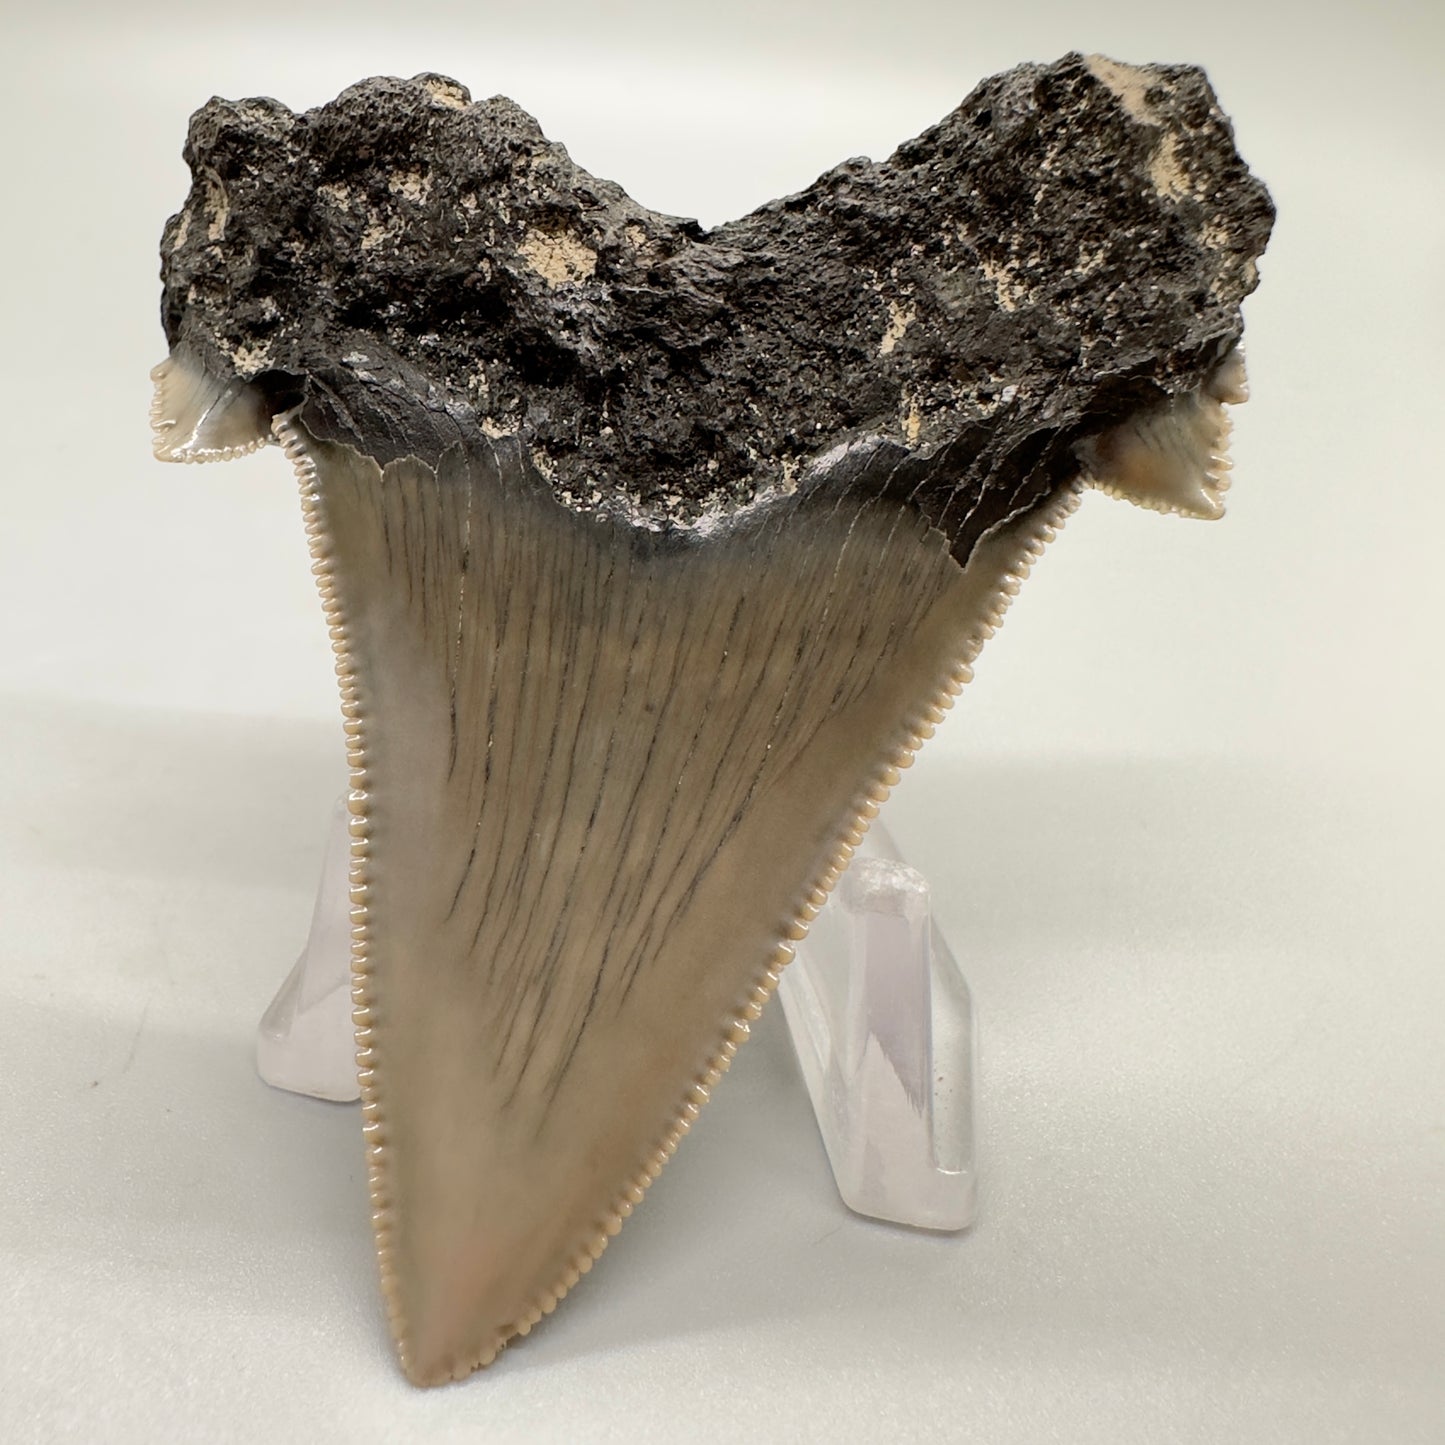 Large, sharply serrated 2.71 inches Carcharocles sokolowi (auriculatus) shark tooth from South Carolina AU366 back down